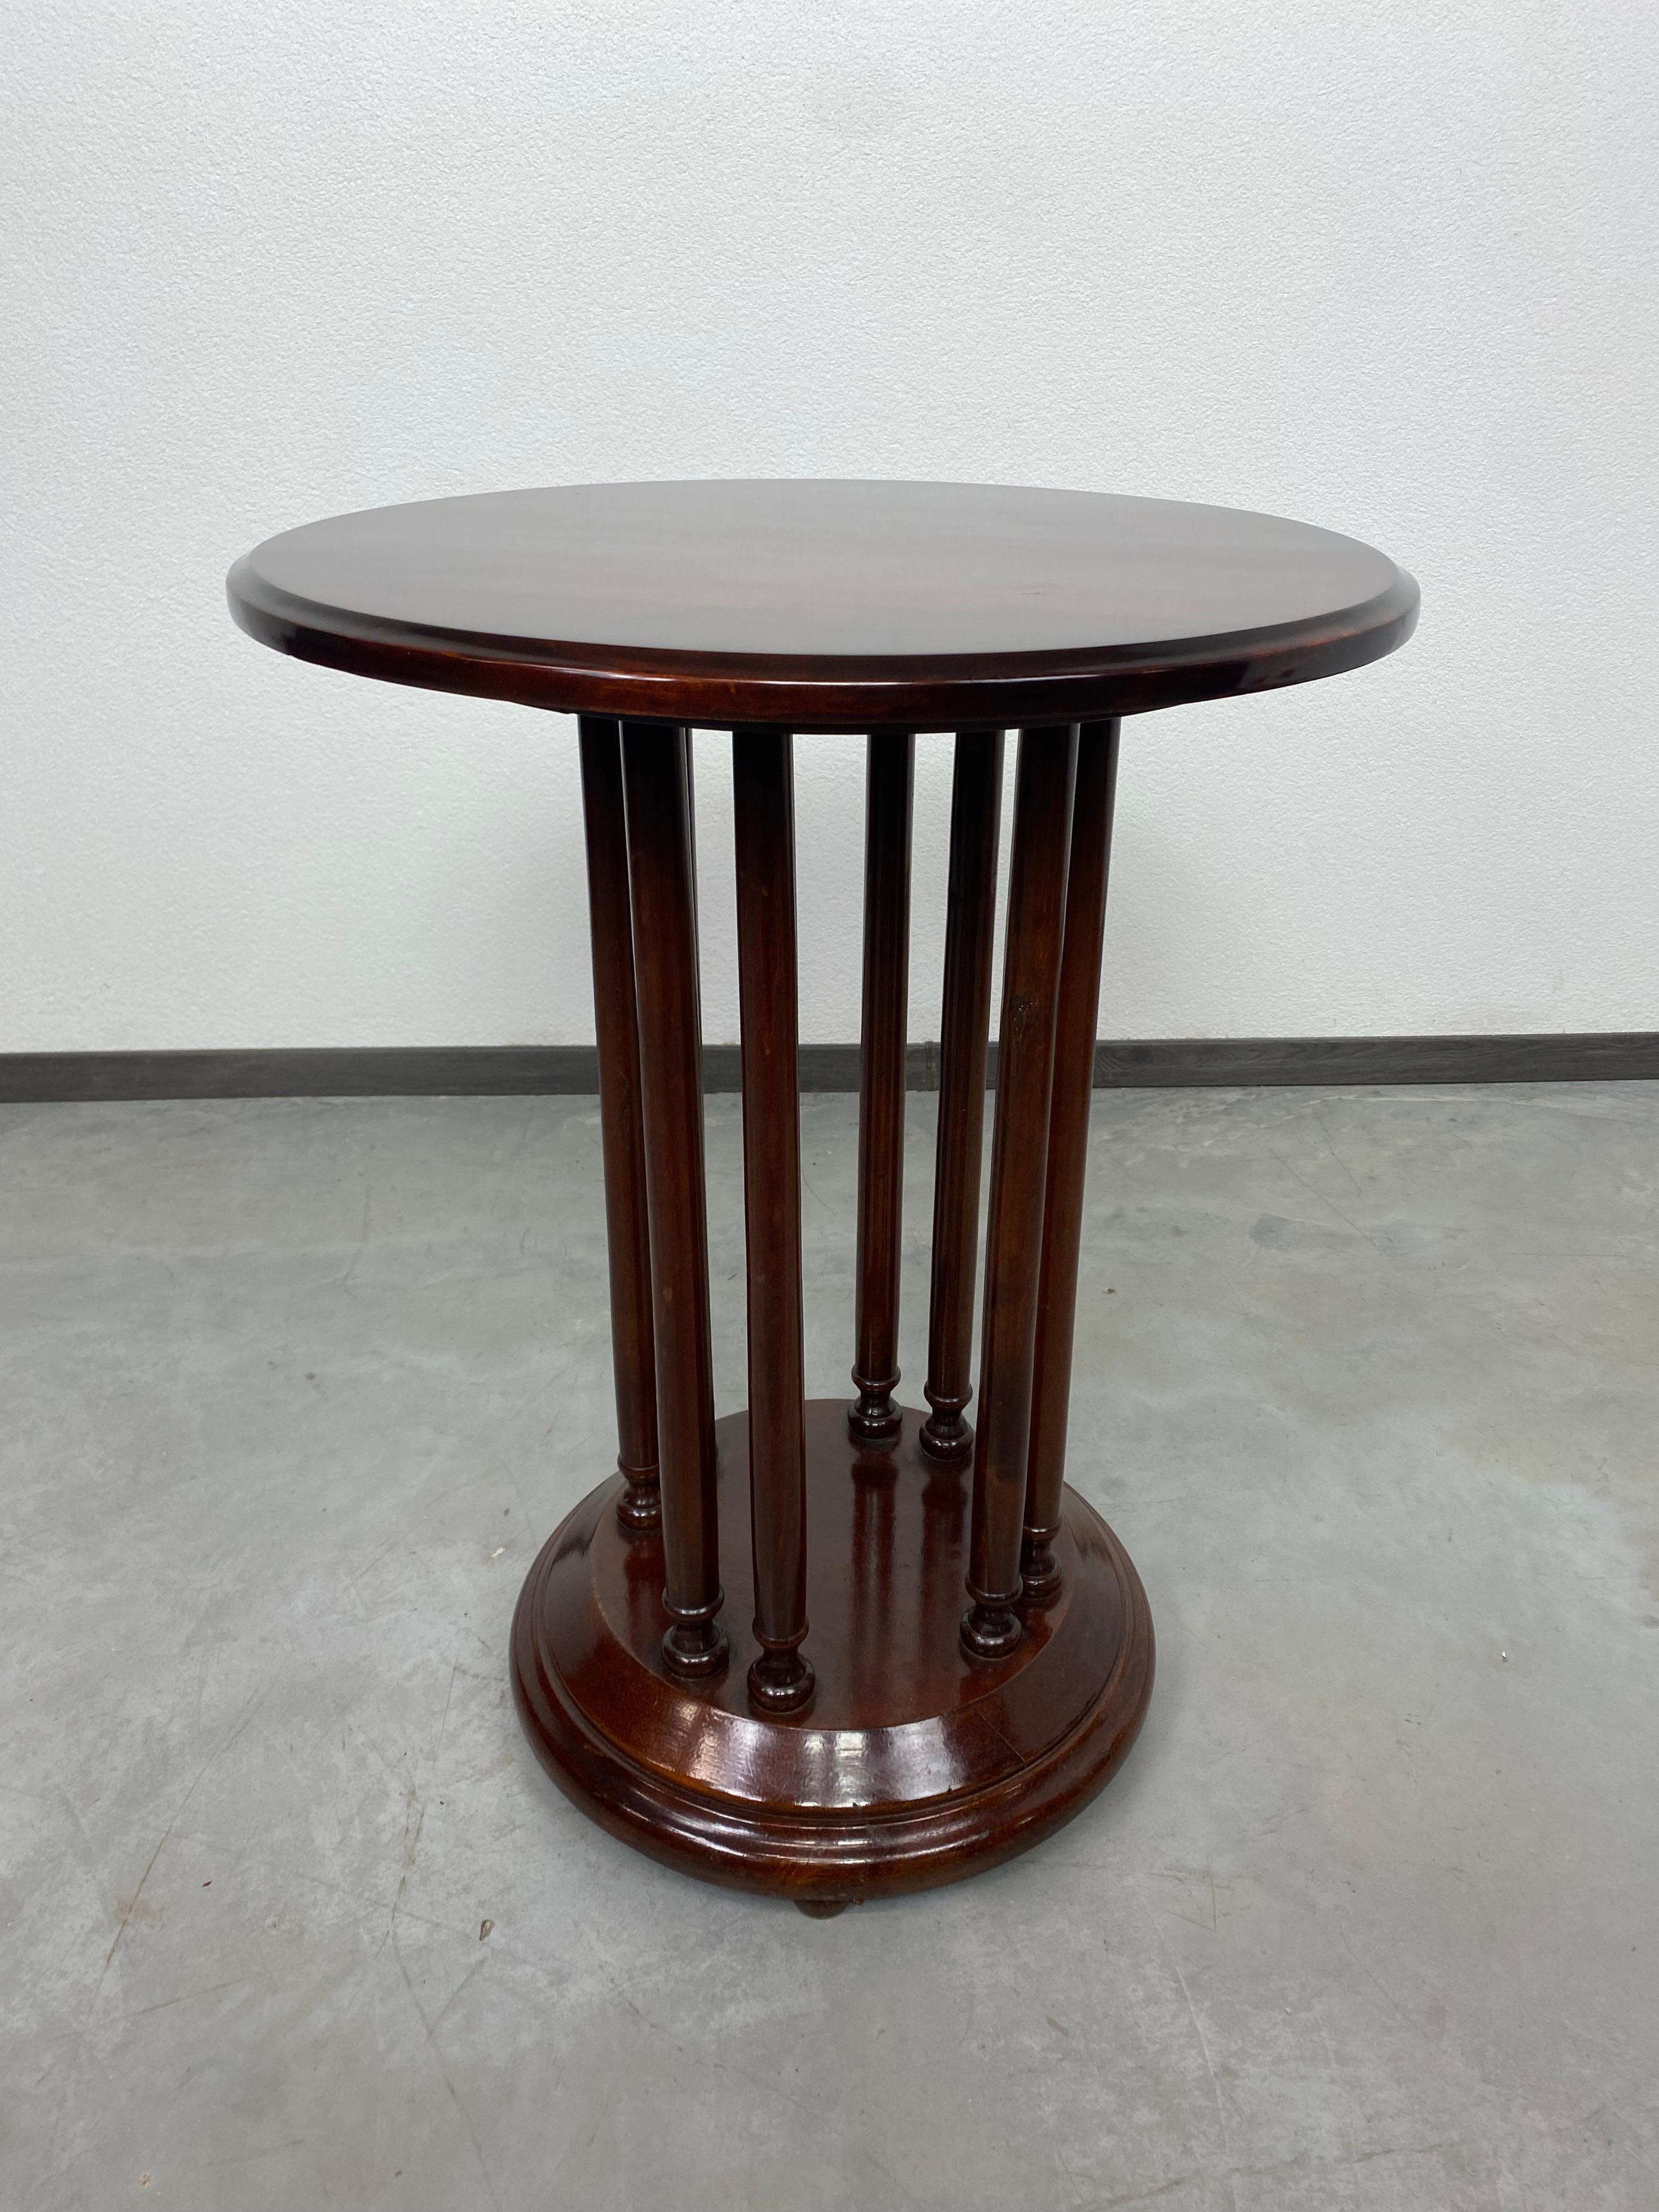 Secession coffee table by Josef Hoffmann, variant of Fledermaus table professionally stained and repolished.